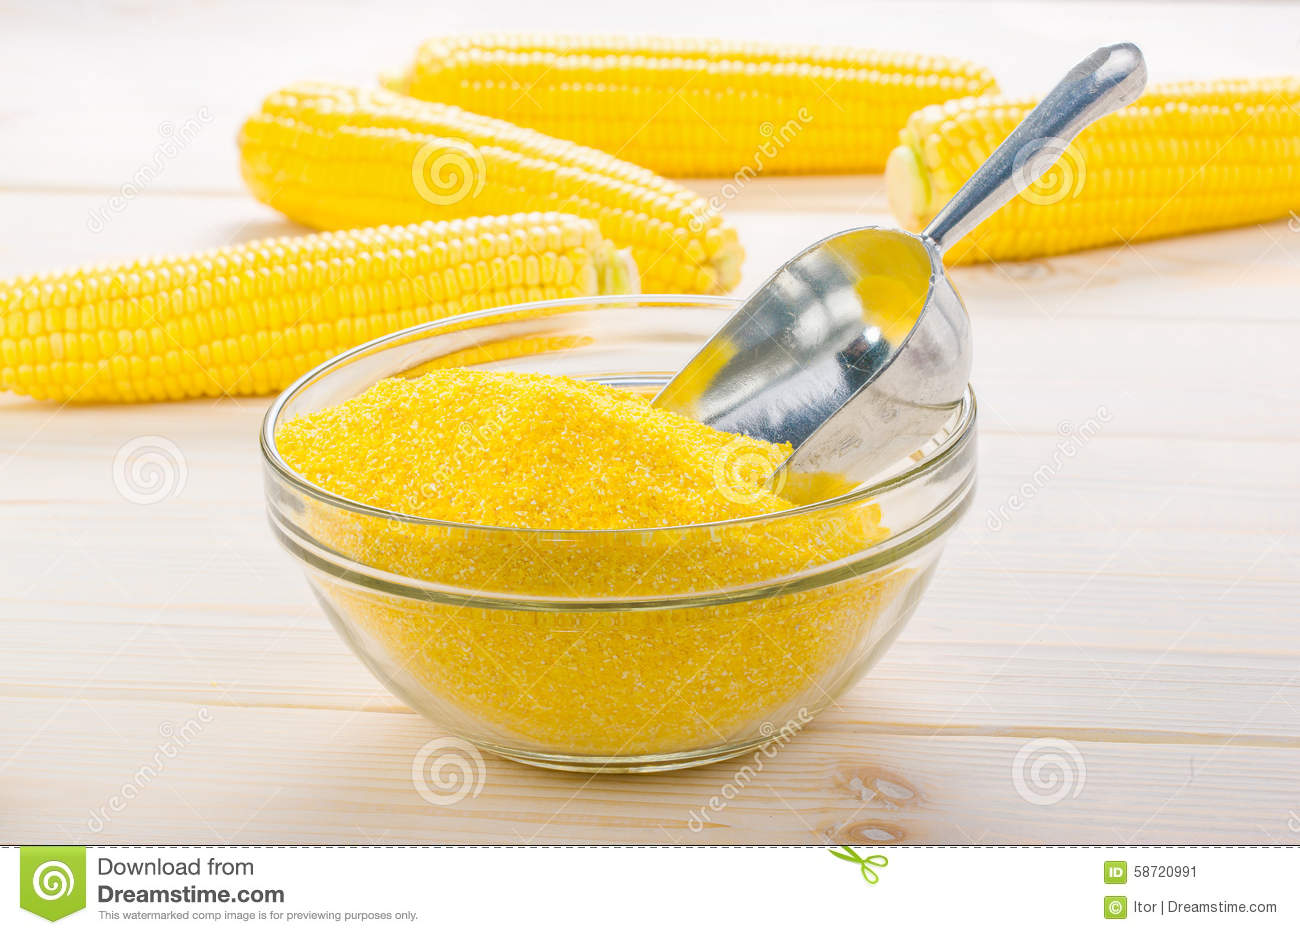 Corn Grits In A Transparent Plate With Ears Of Corn On The Wooden    